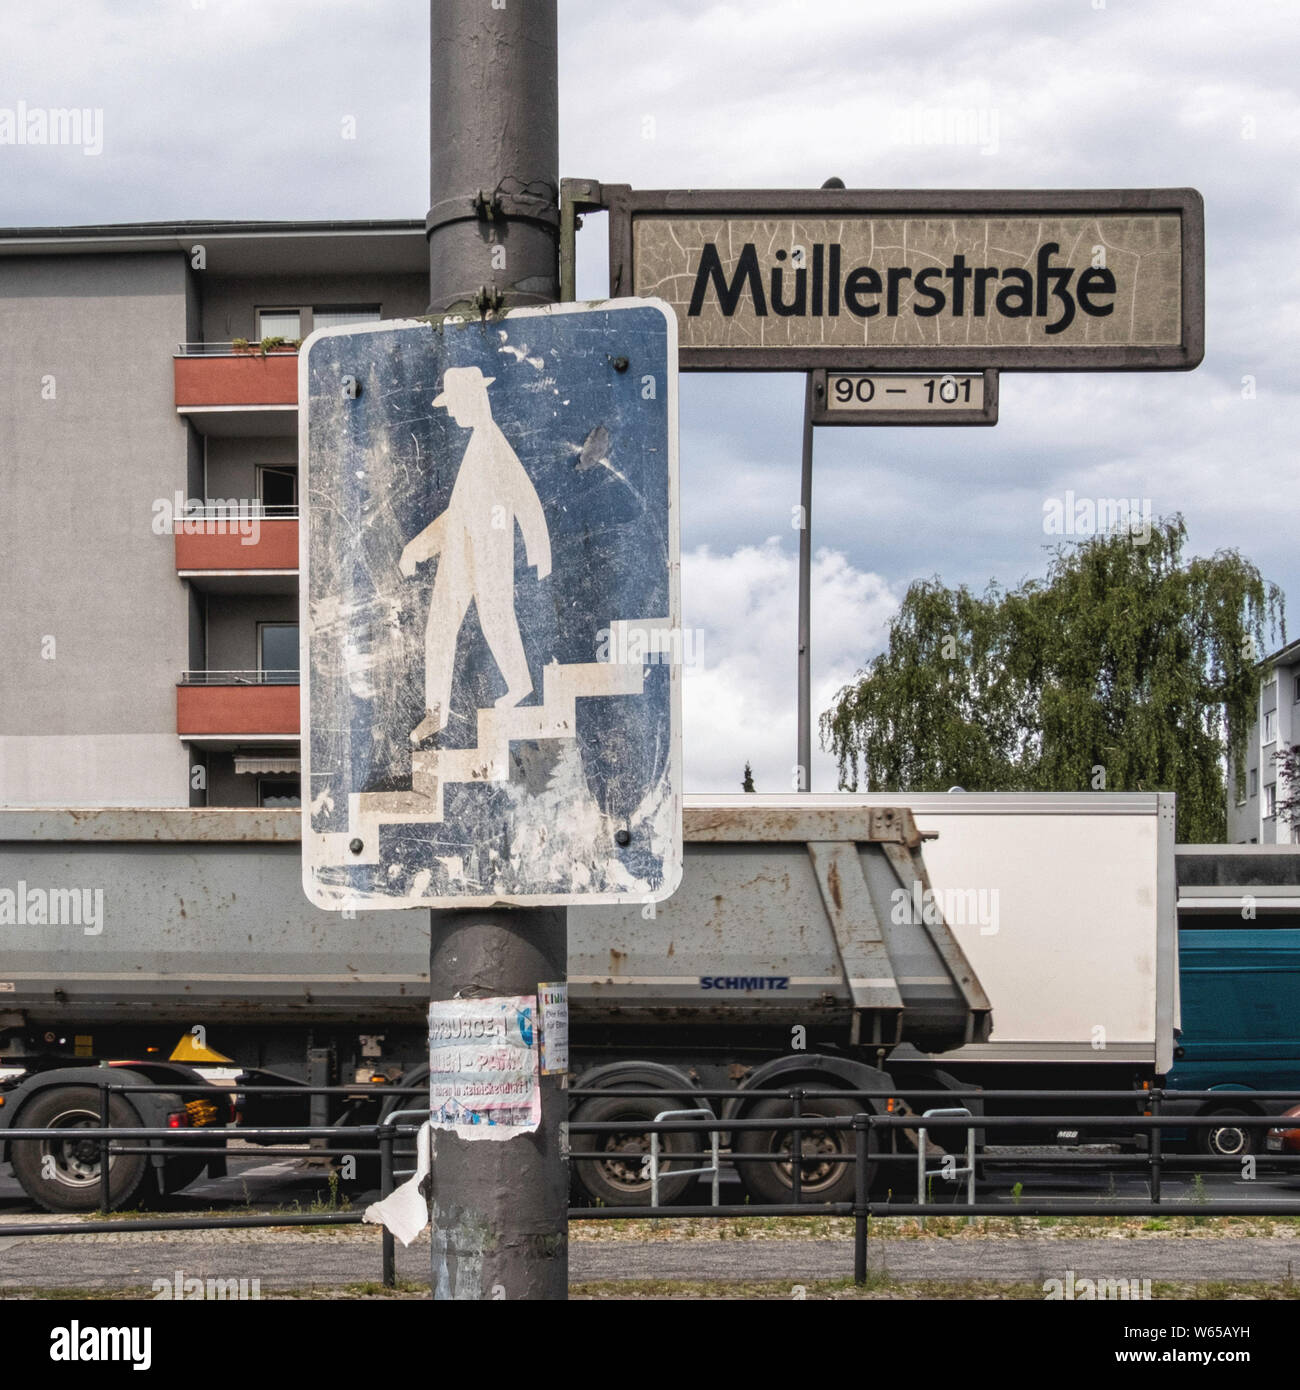 Müllerstraße street sign In Wedding-Berlin.Weathered picture of man walking down stairs Stock Photo